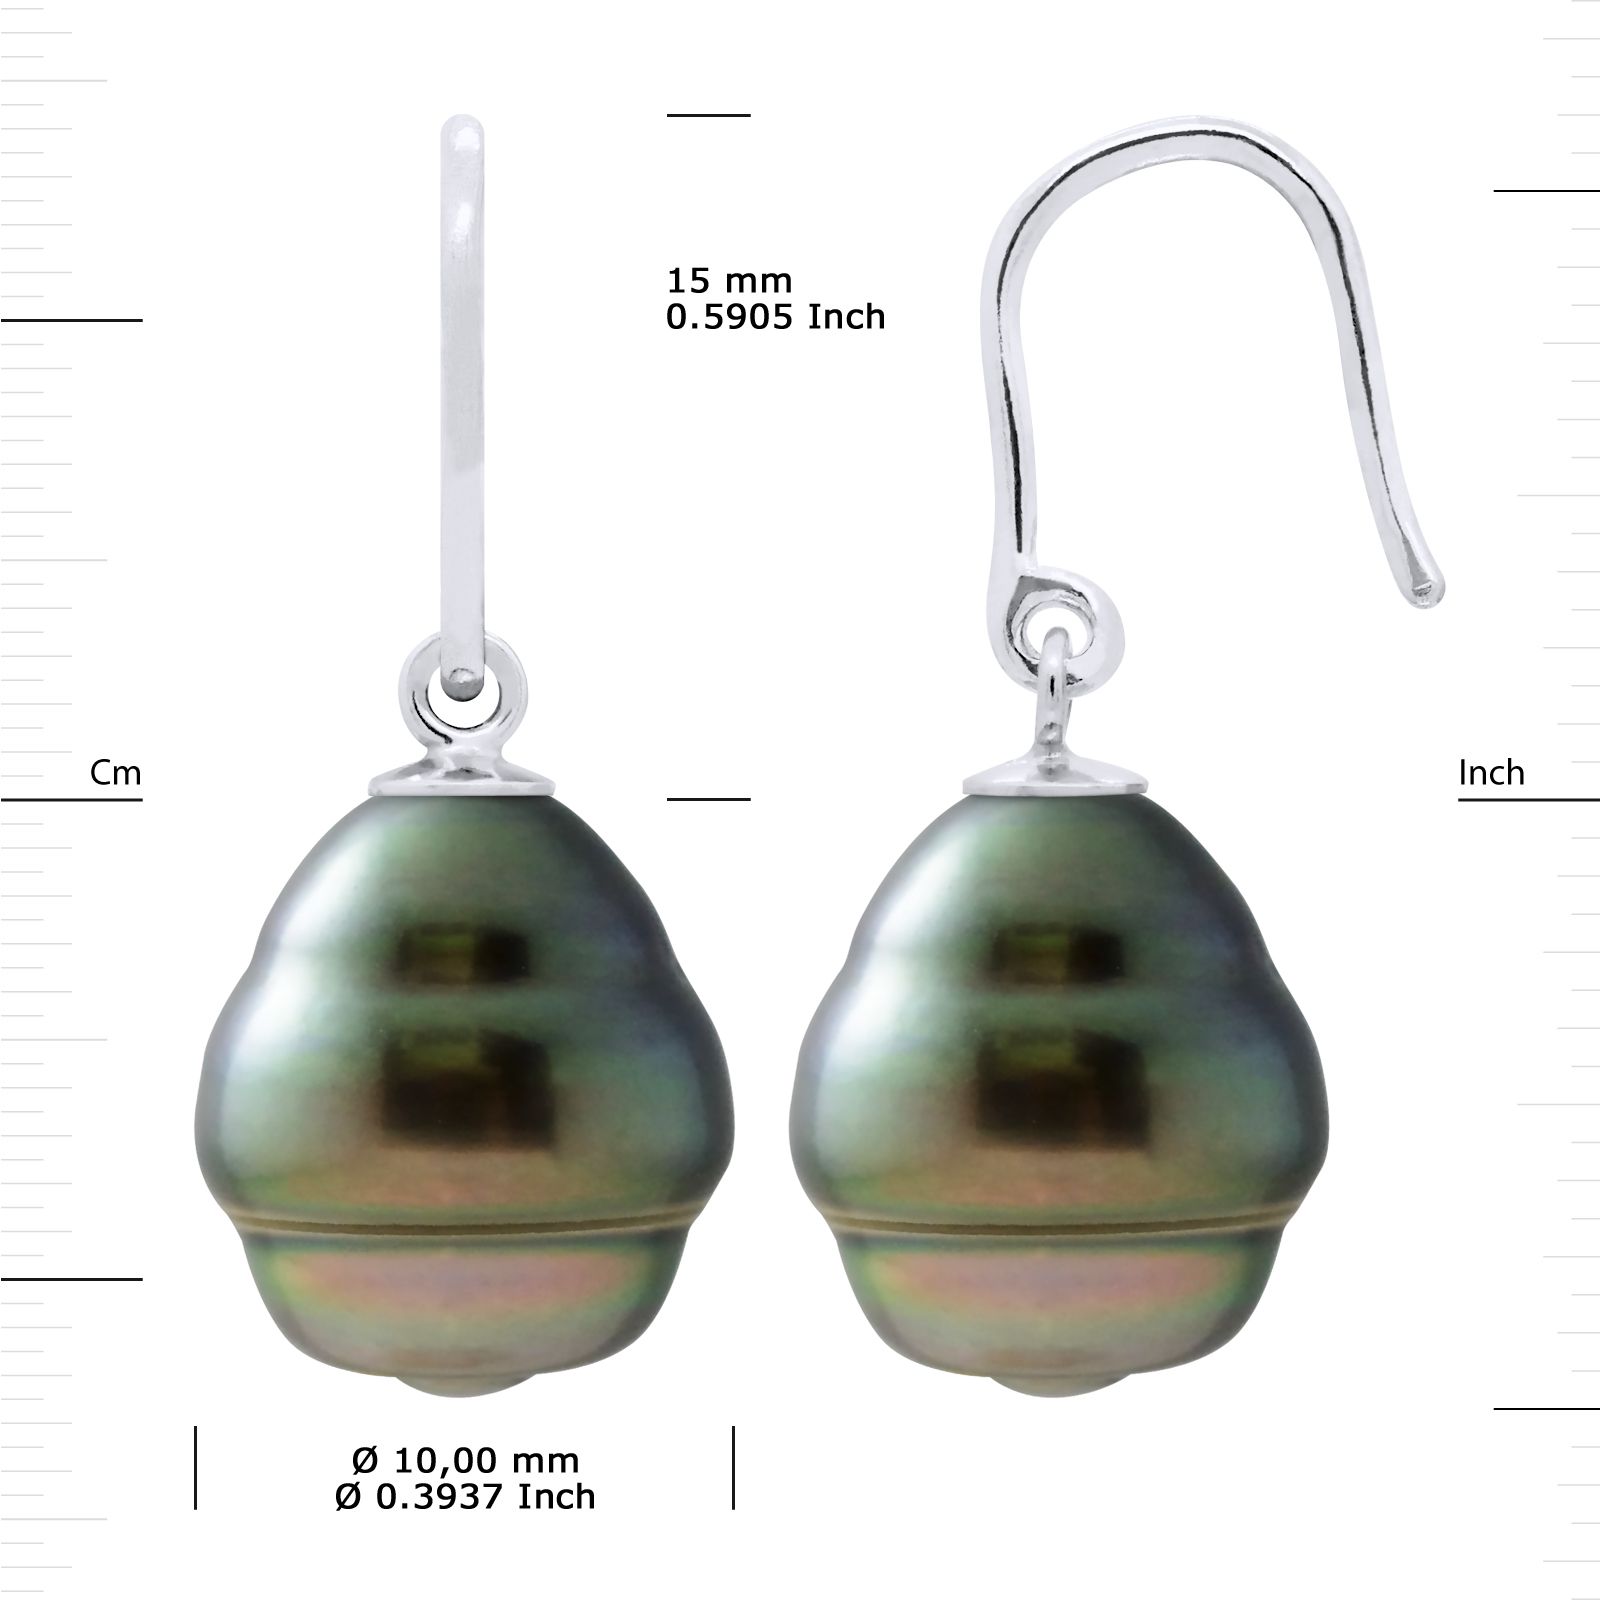 Earrings of 925 Sterling Silver true Cultured Tahitian Pearl 10-11 mm and Hook system 925 Sterling Silver Rhodium-plated - Our jewellery is made in France and will be delivered in a gift box accompanied by a Certificate of Authenticity and International Warranty